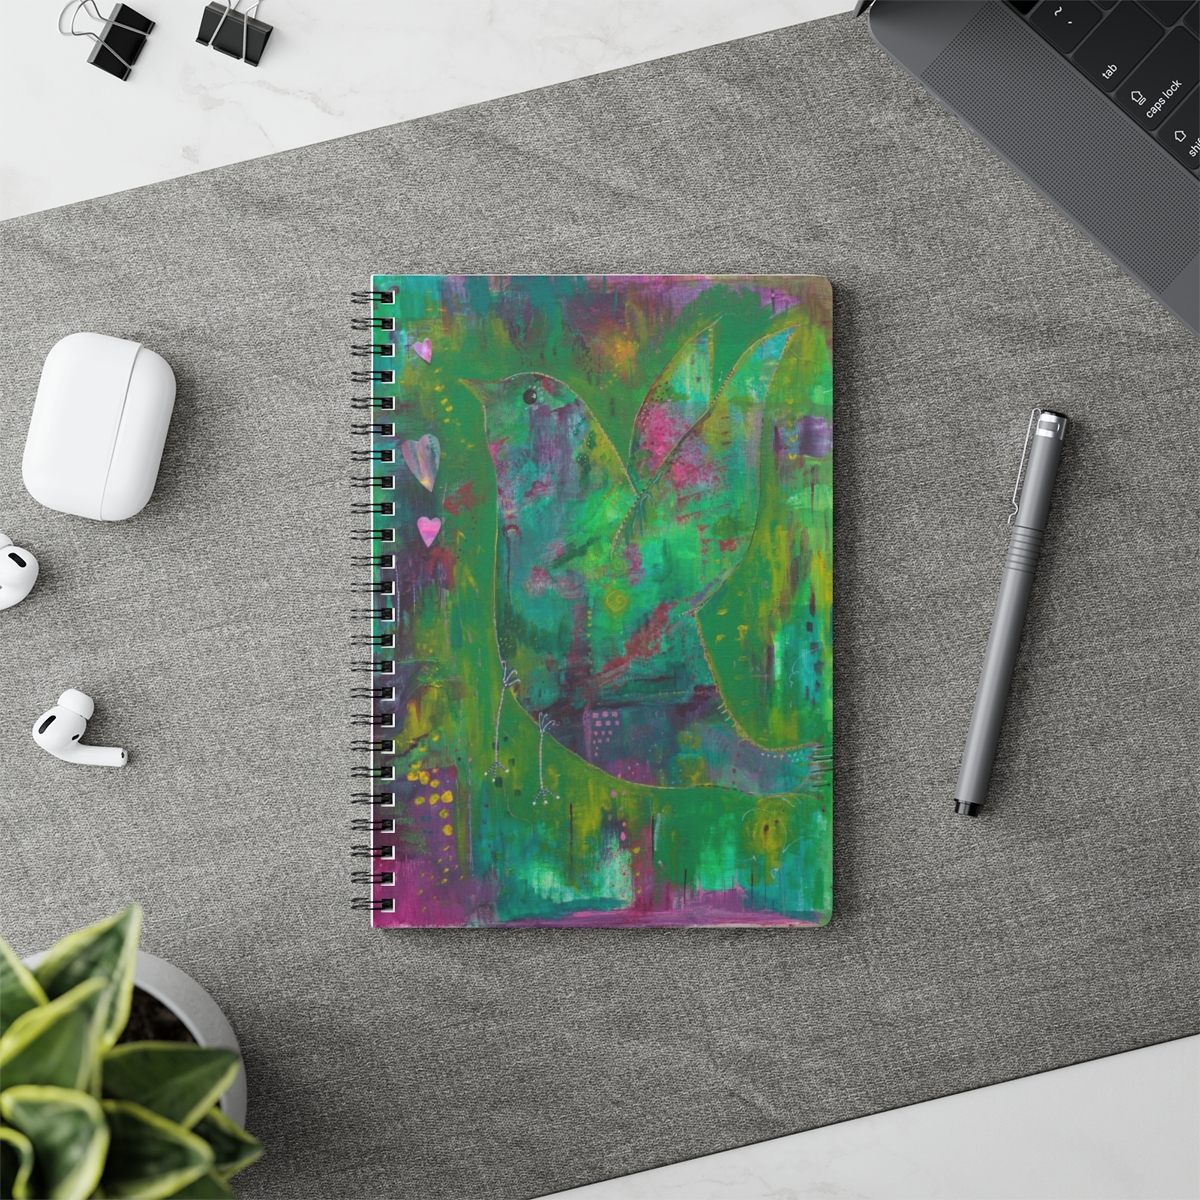 Special bird notebook in context. Whimsical abstract bird taking flight created using layers of green and purple acrylic paints.